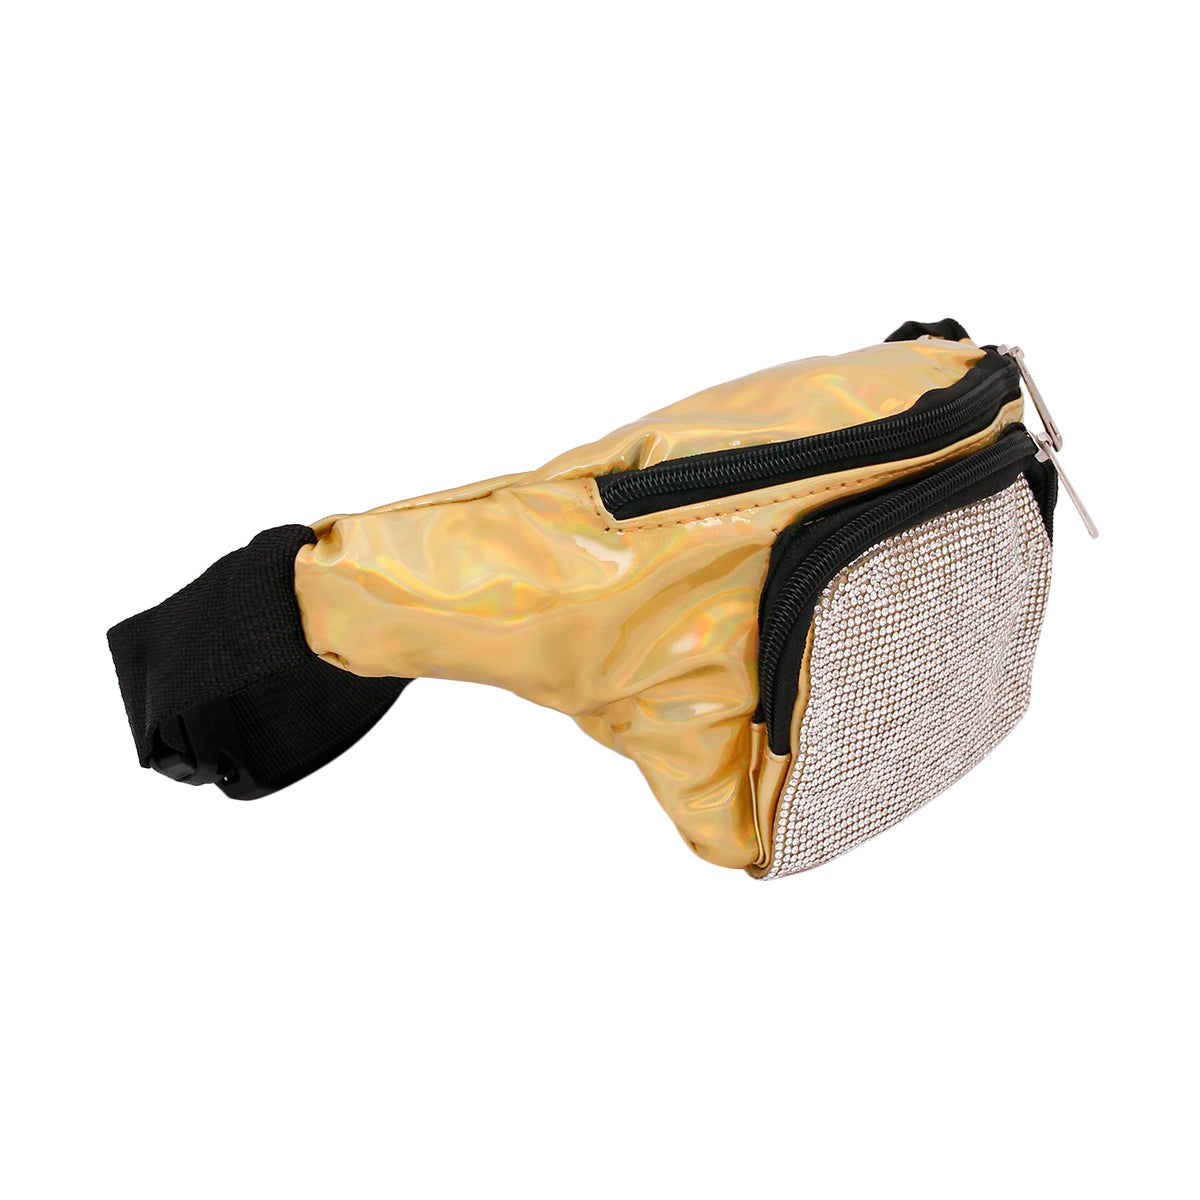 Rhinestone and Shiny Gold Patent Leather Fanny Pack